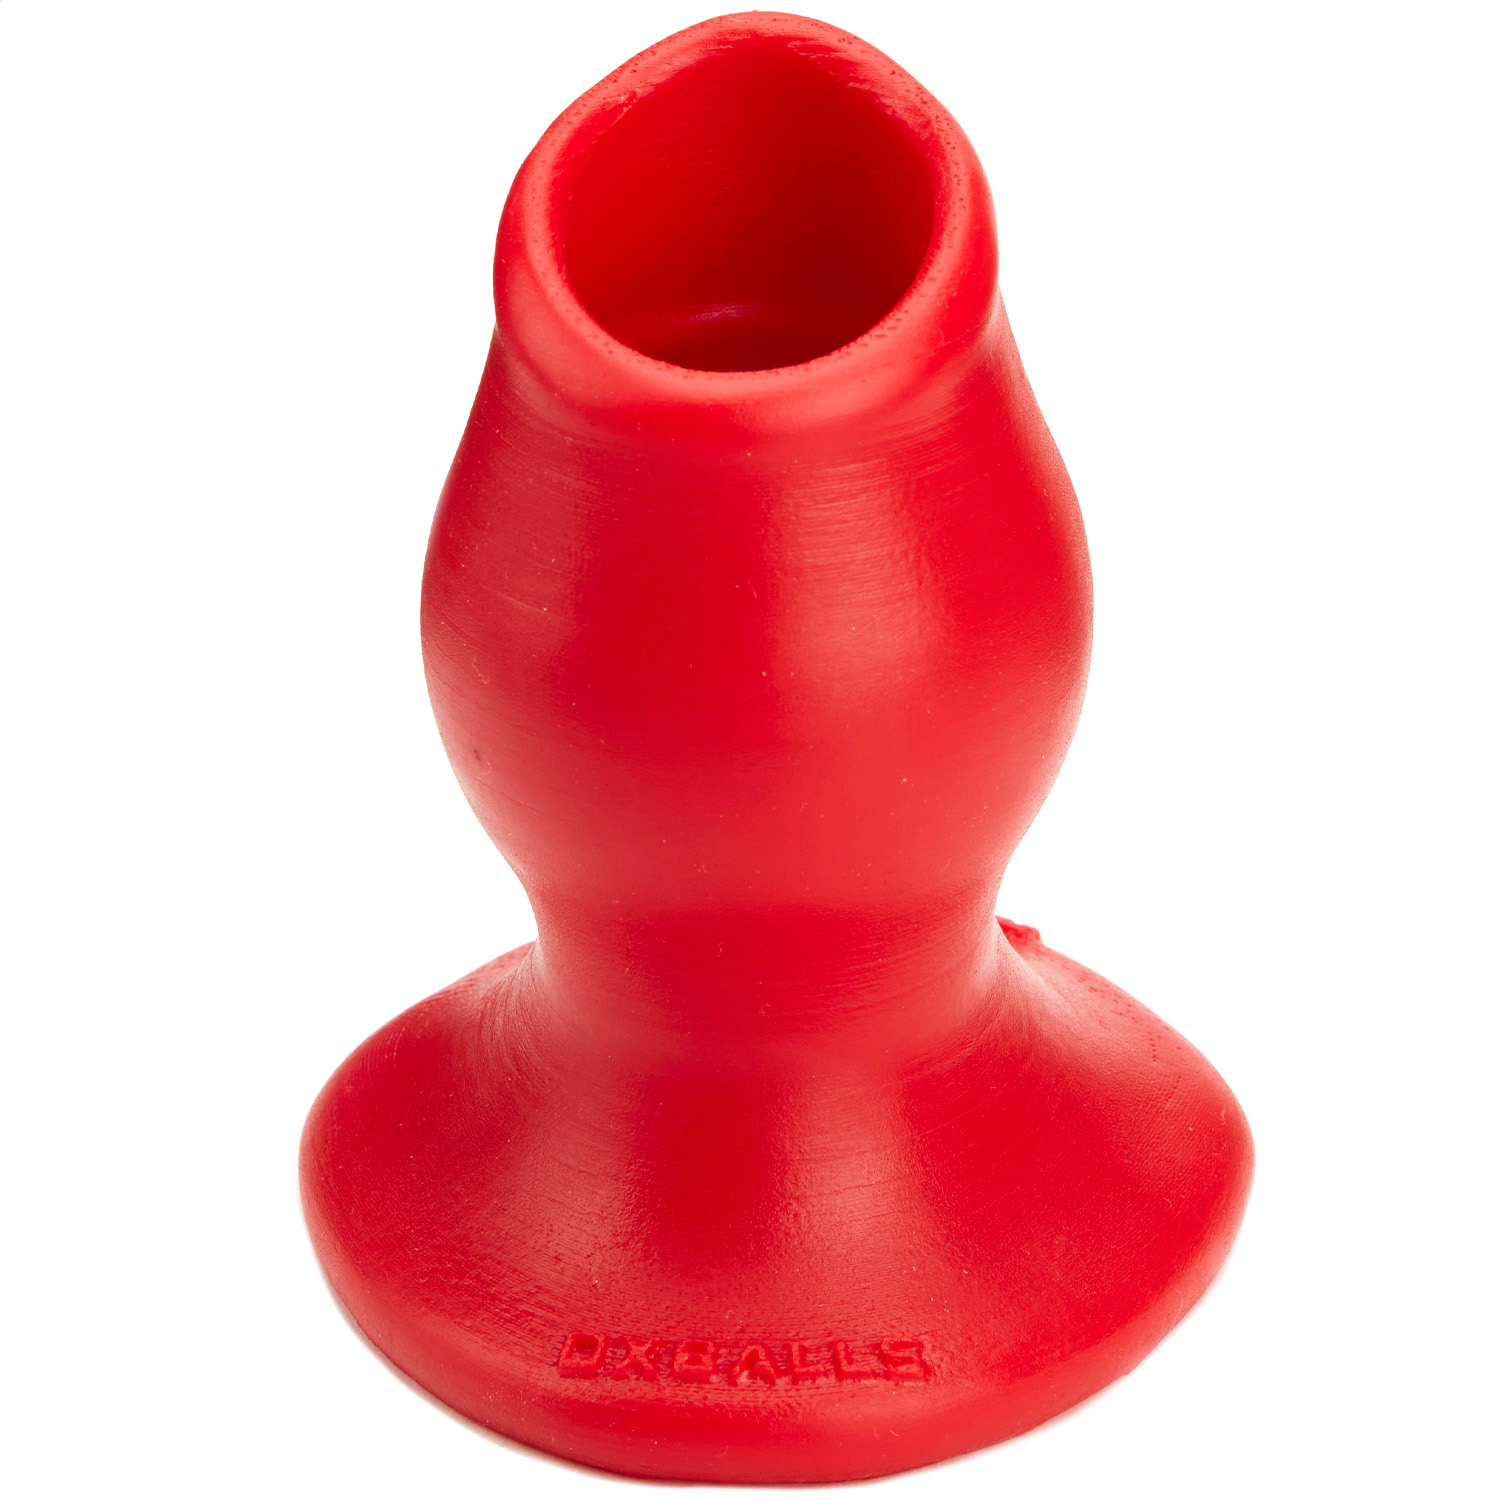 Oxballs Pig Hole Butt Plug Large - Red